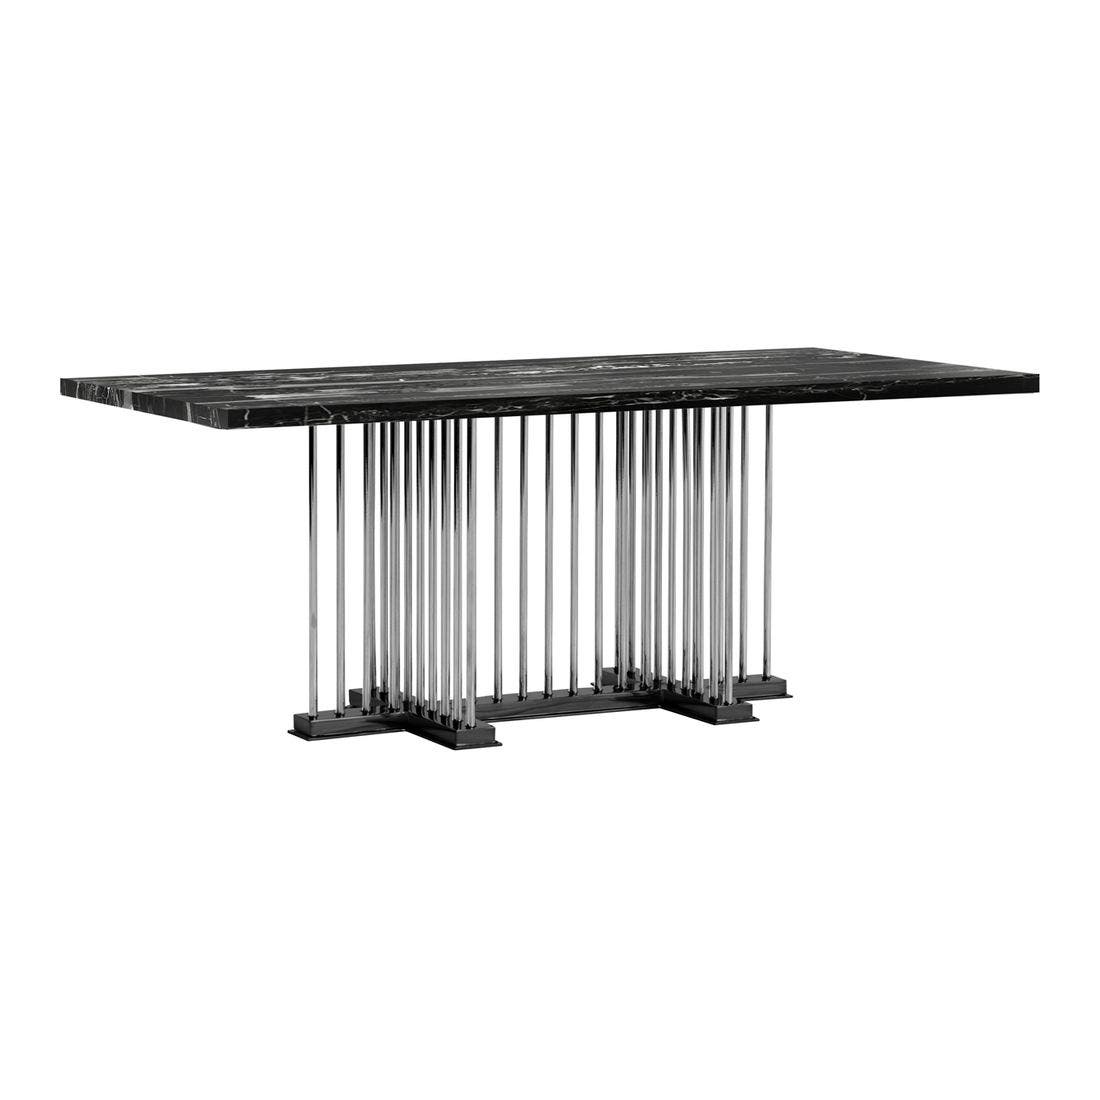 59021659-base-sb03-s-furniture-dining-room-dining-tables-01